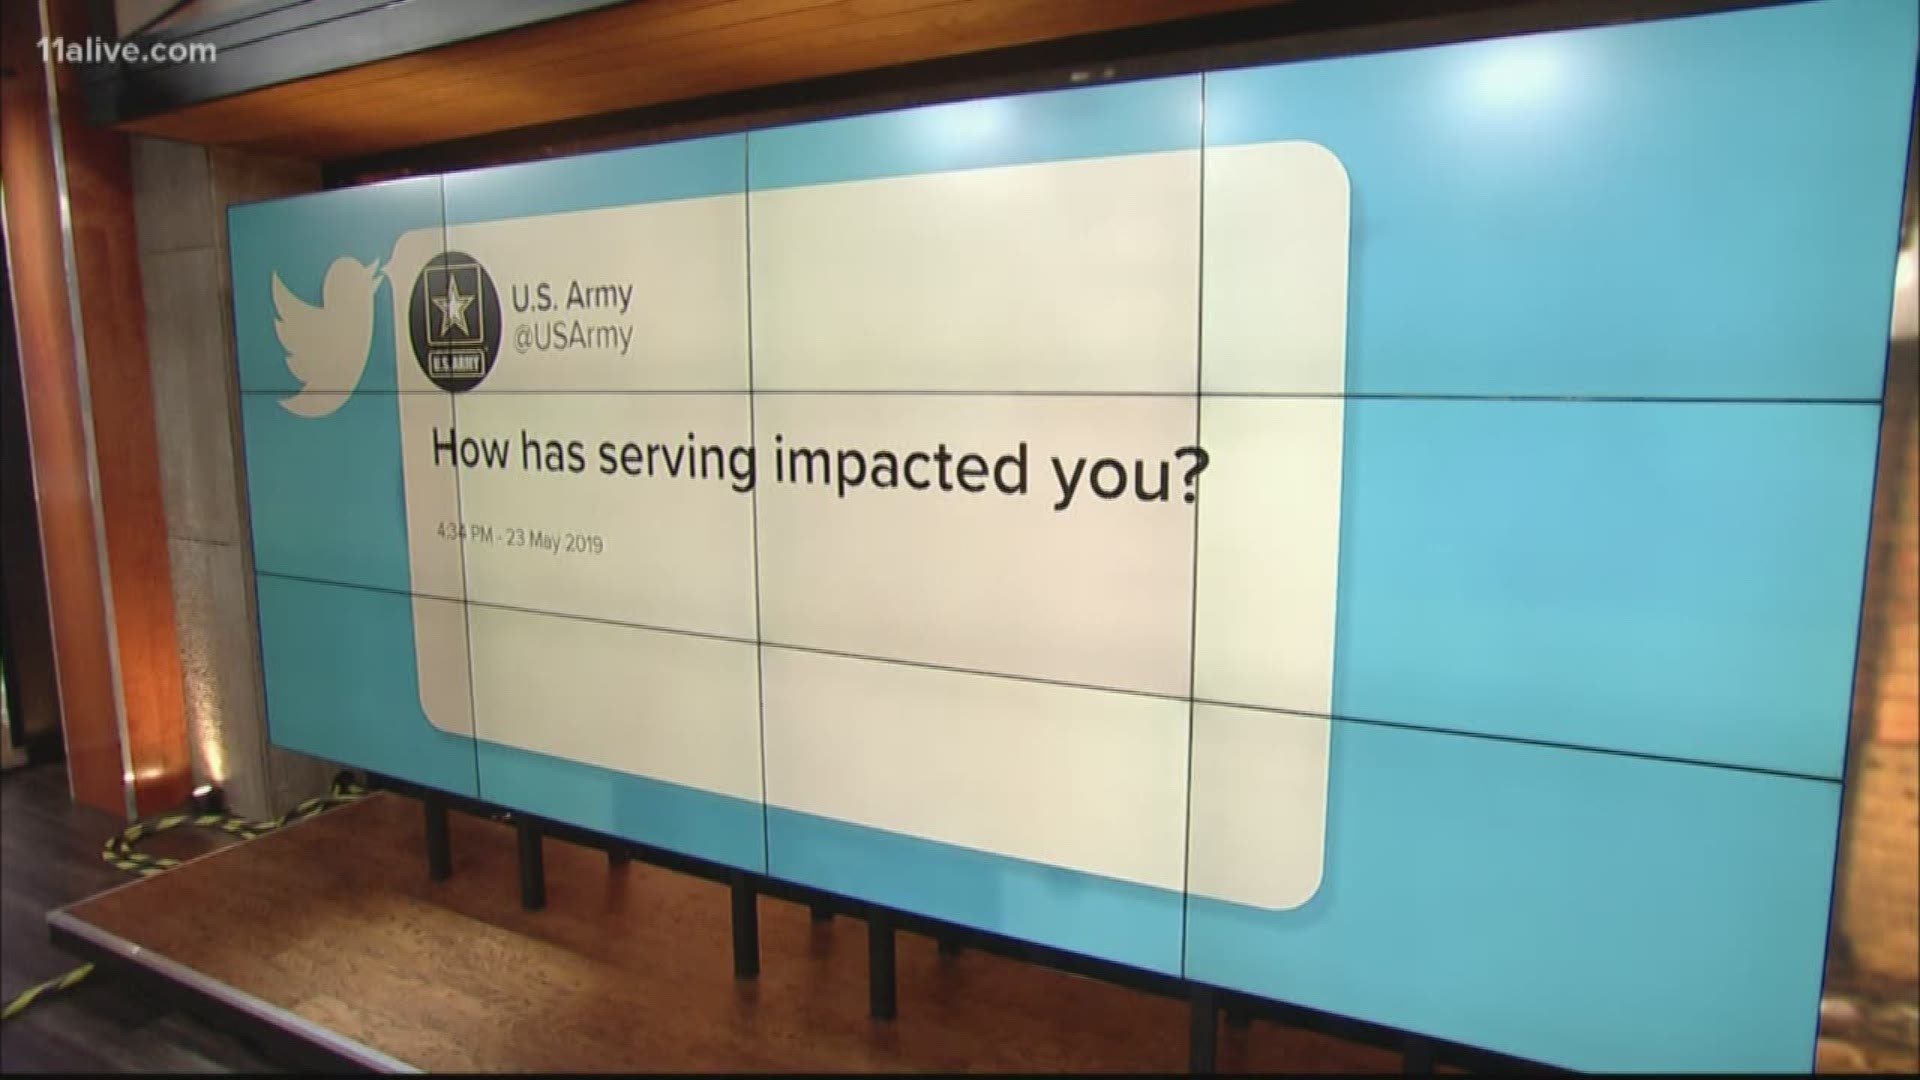 “How has serving impacted you?” The U.S. Army asked via Twitter.